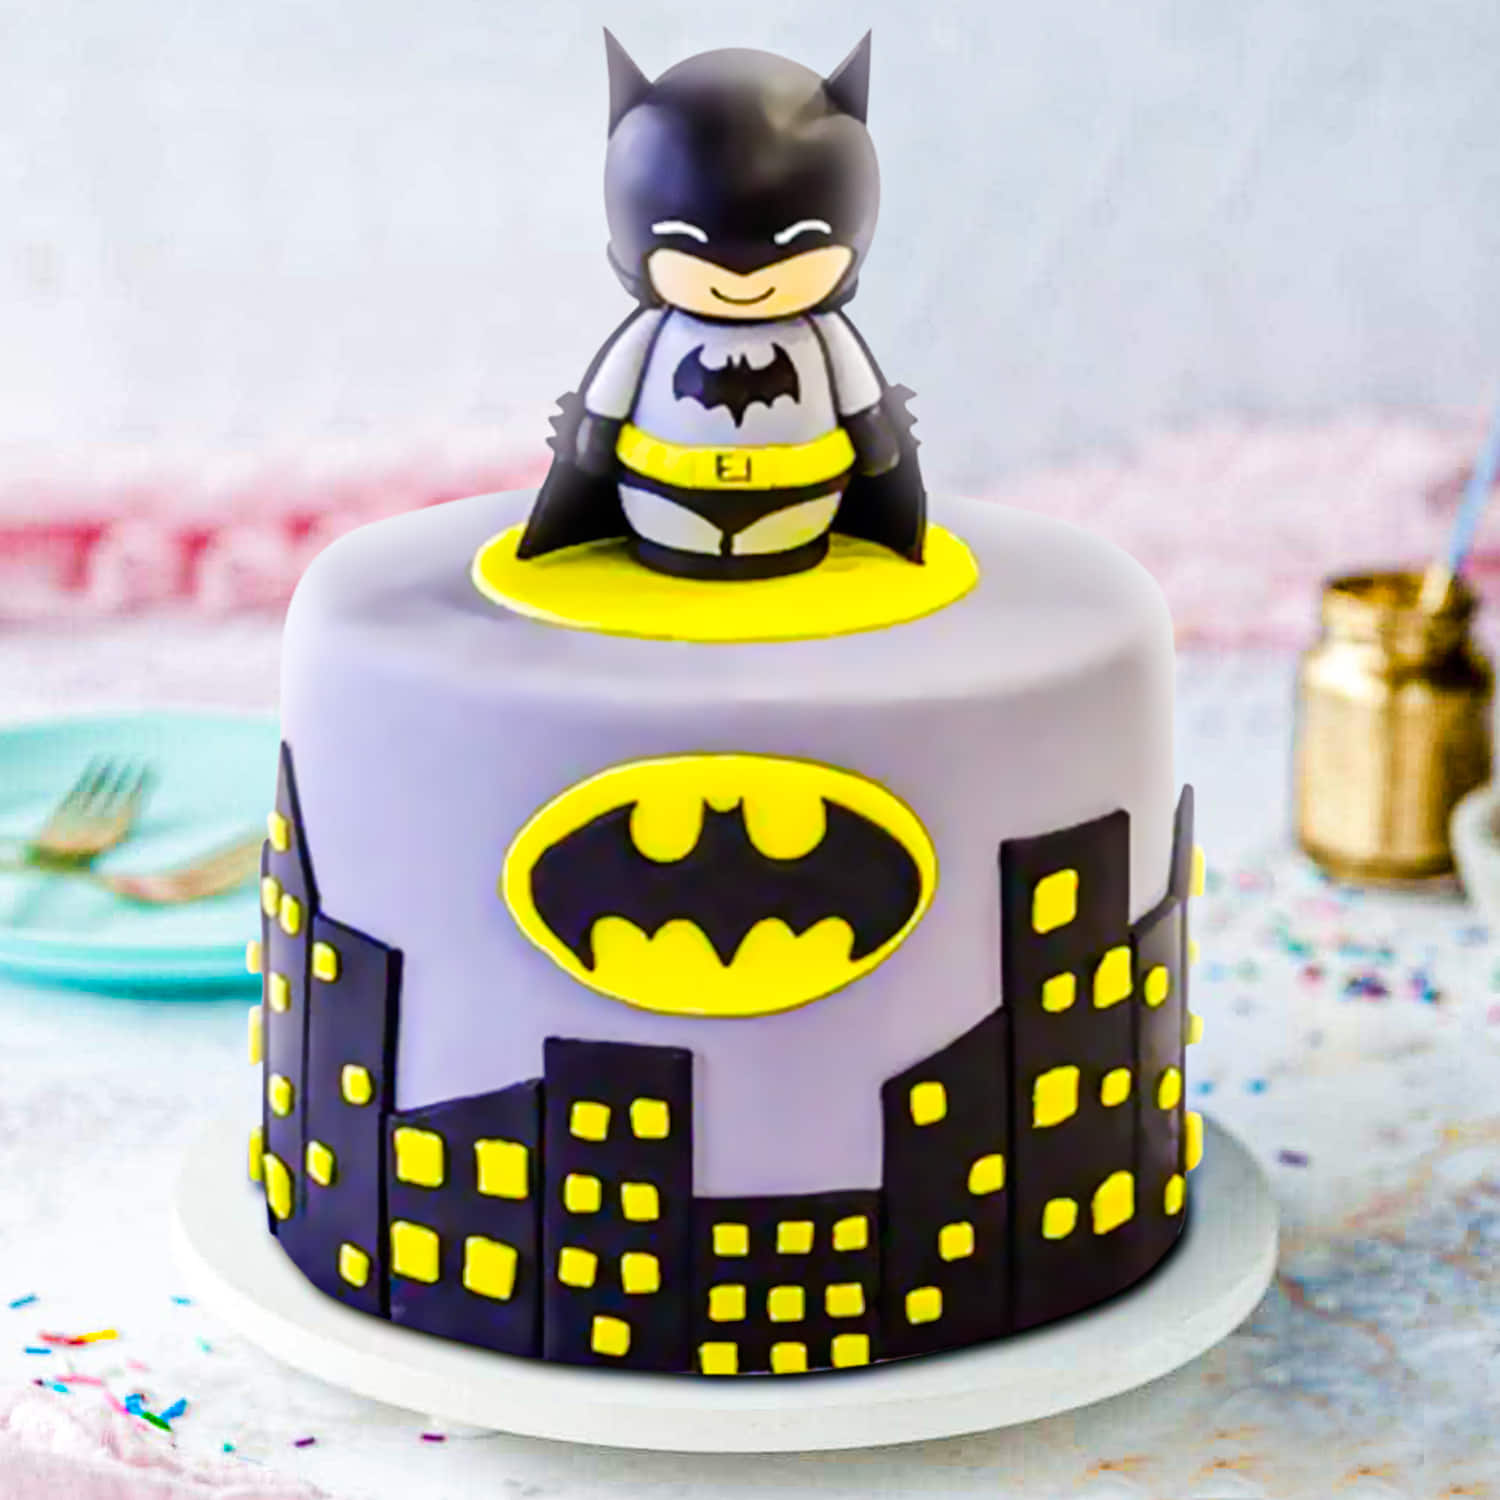 HOW TO DECORATE A BATMAN CAKE | Summer 2017 - YouTube